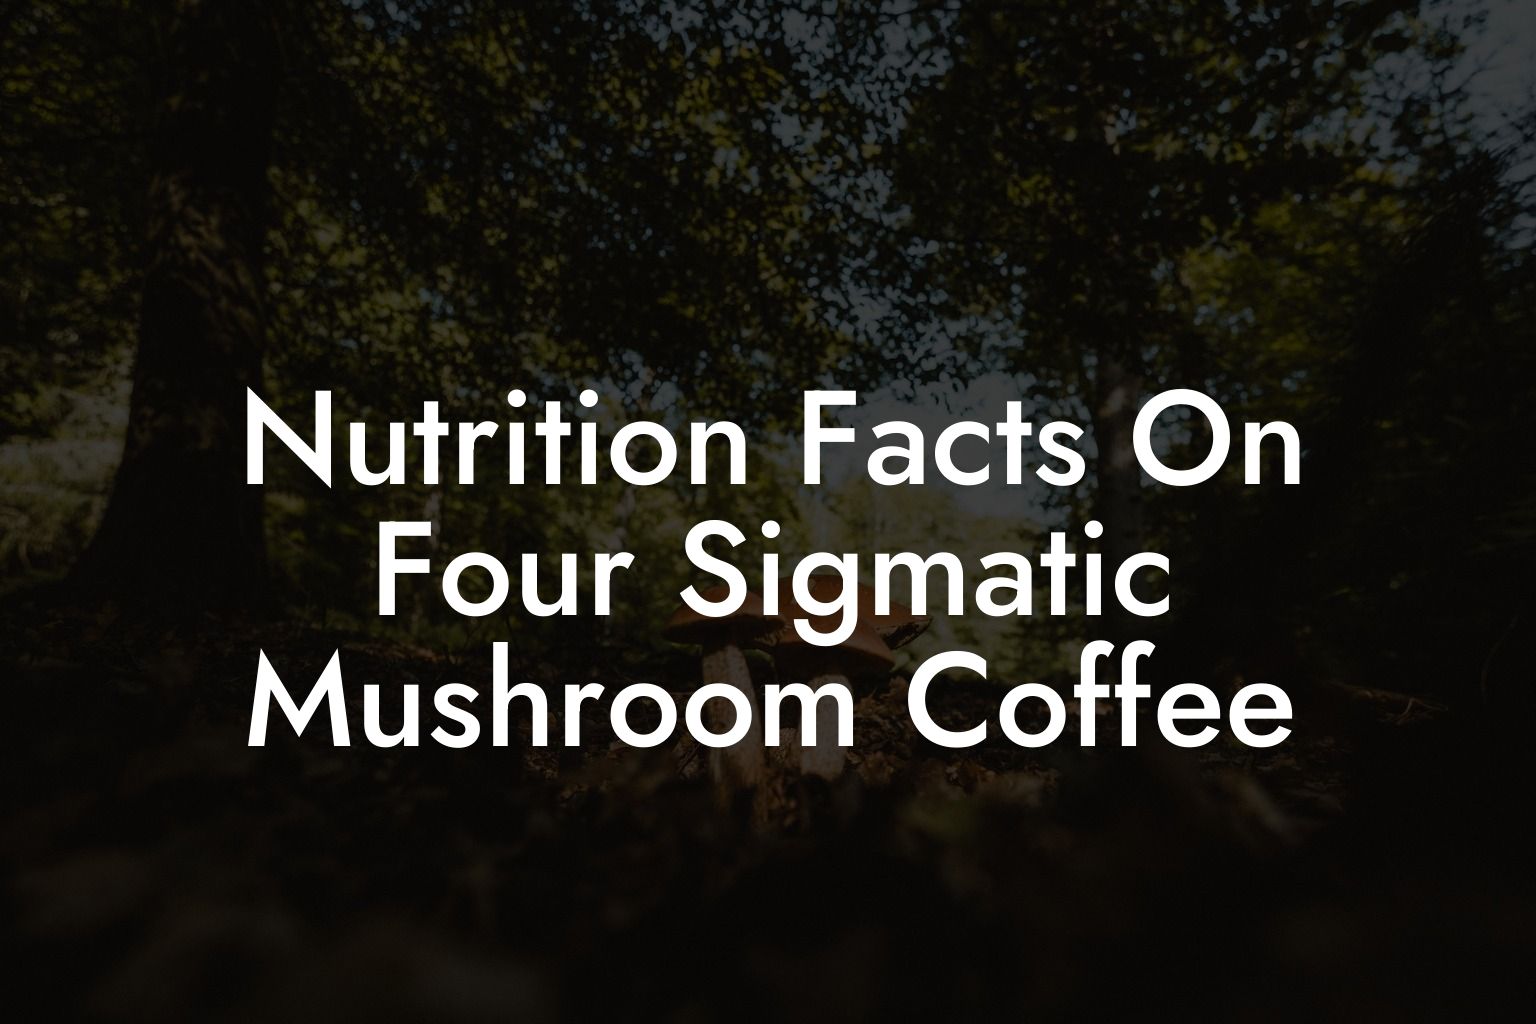 Nutrition Facts On Four Sigmatic Mushroom Coffee